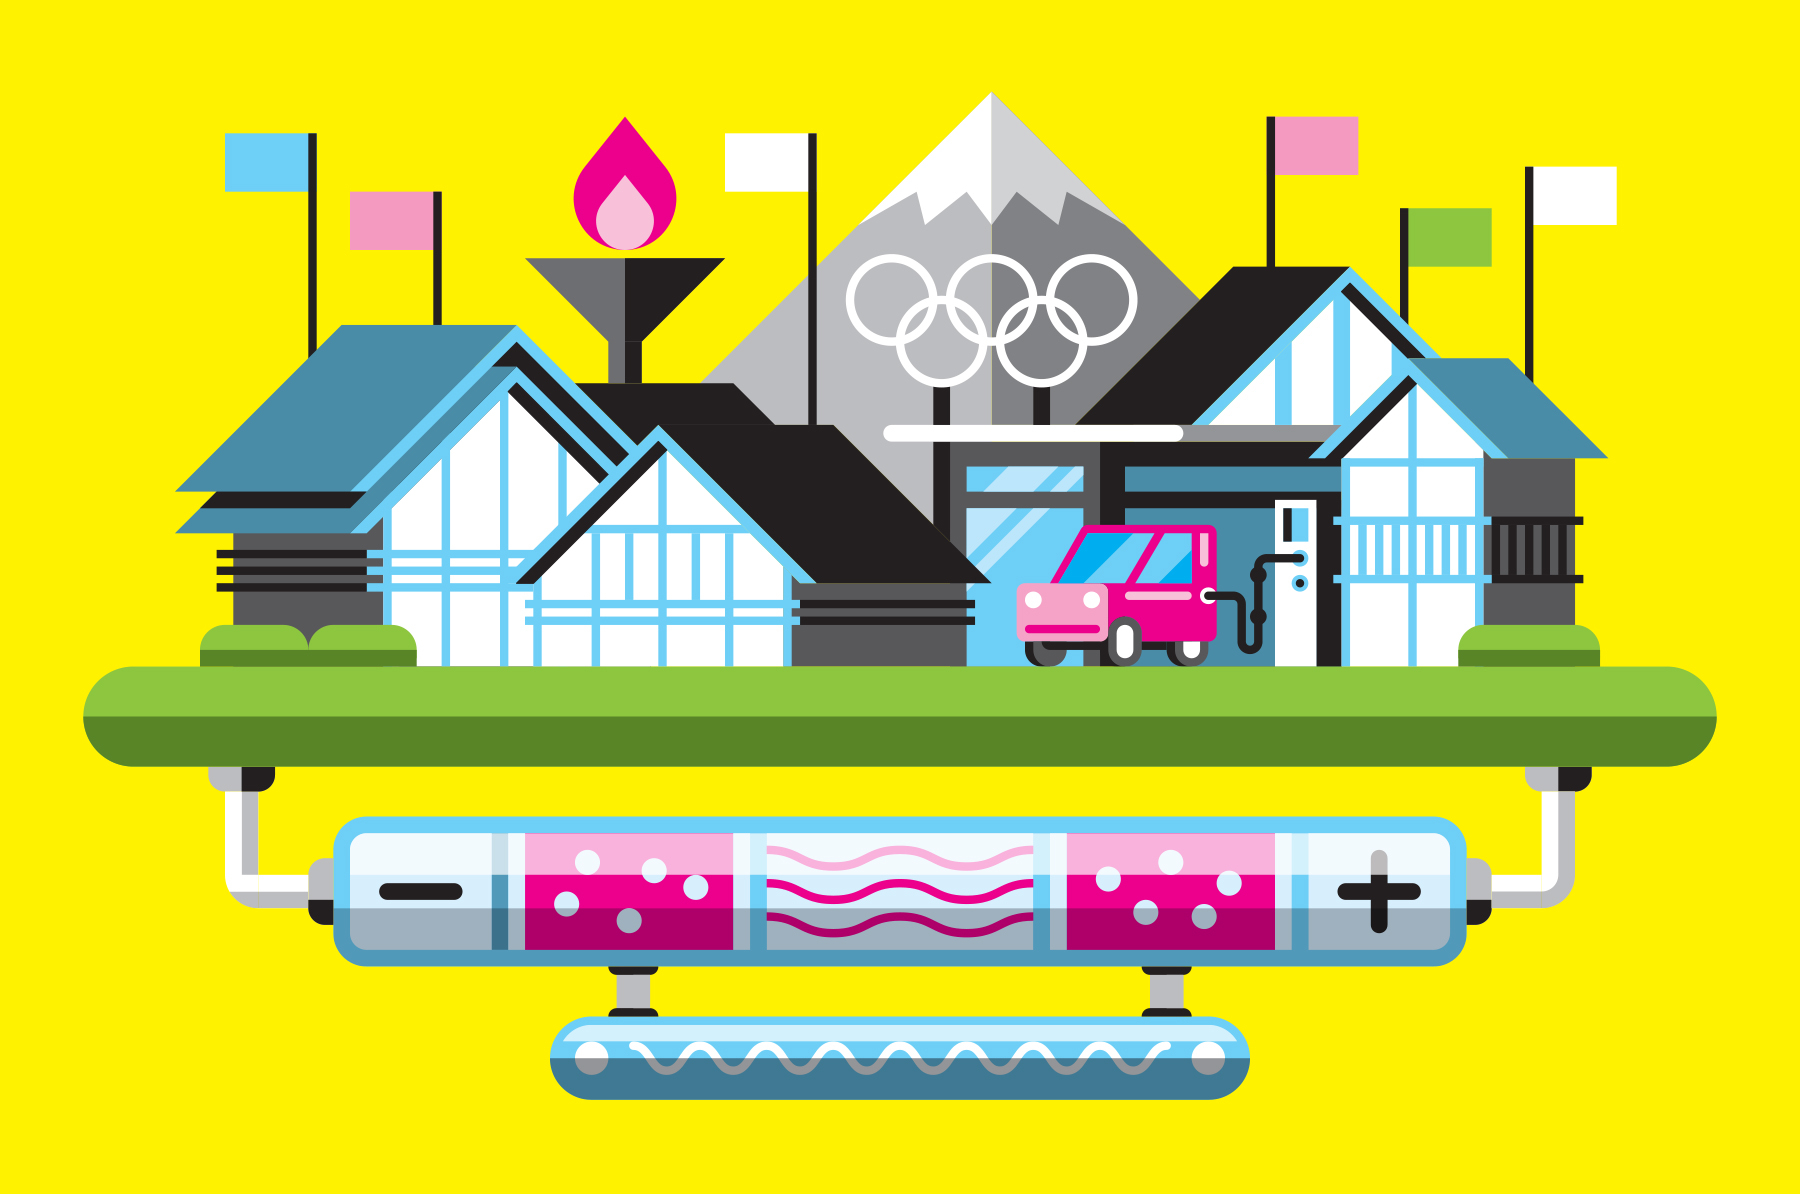 The Olympic Village Of The Future